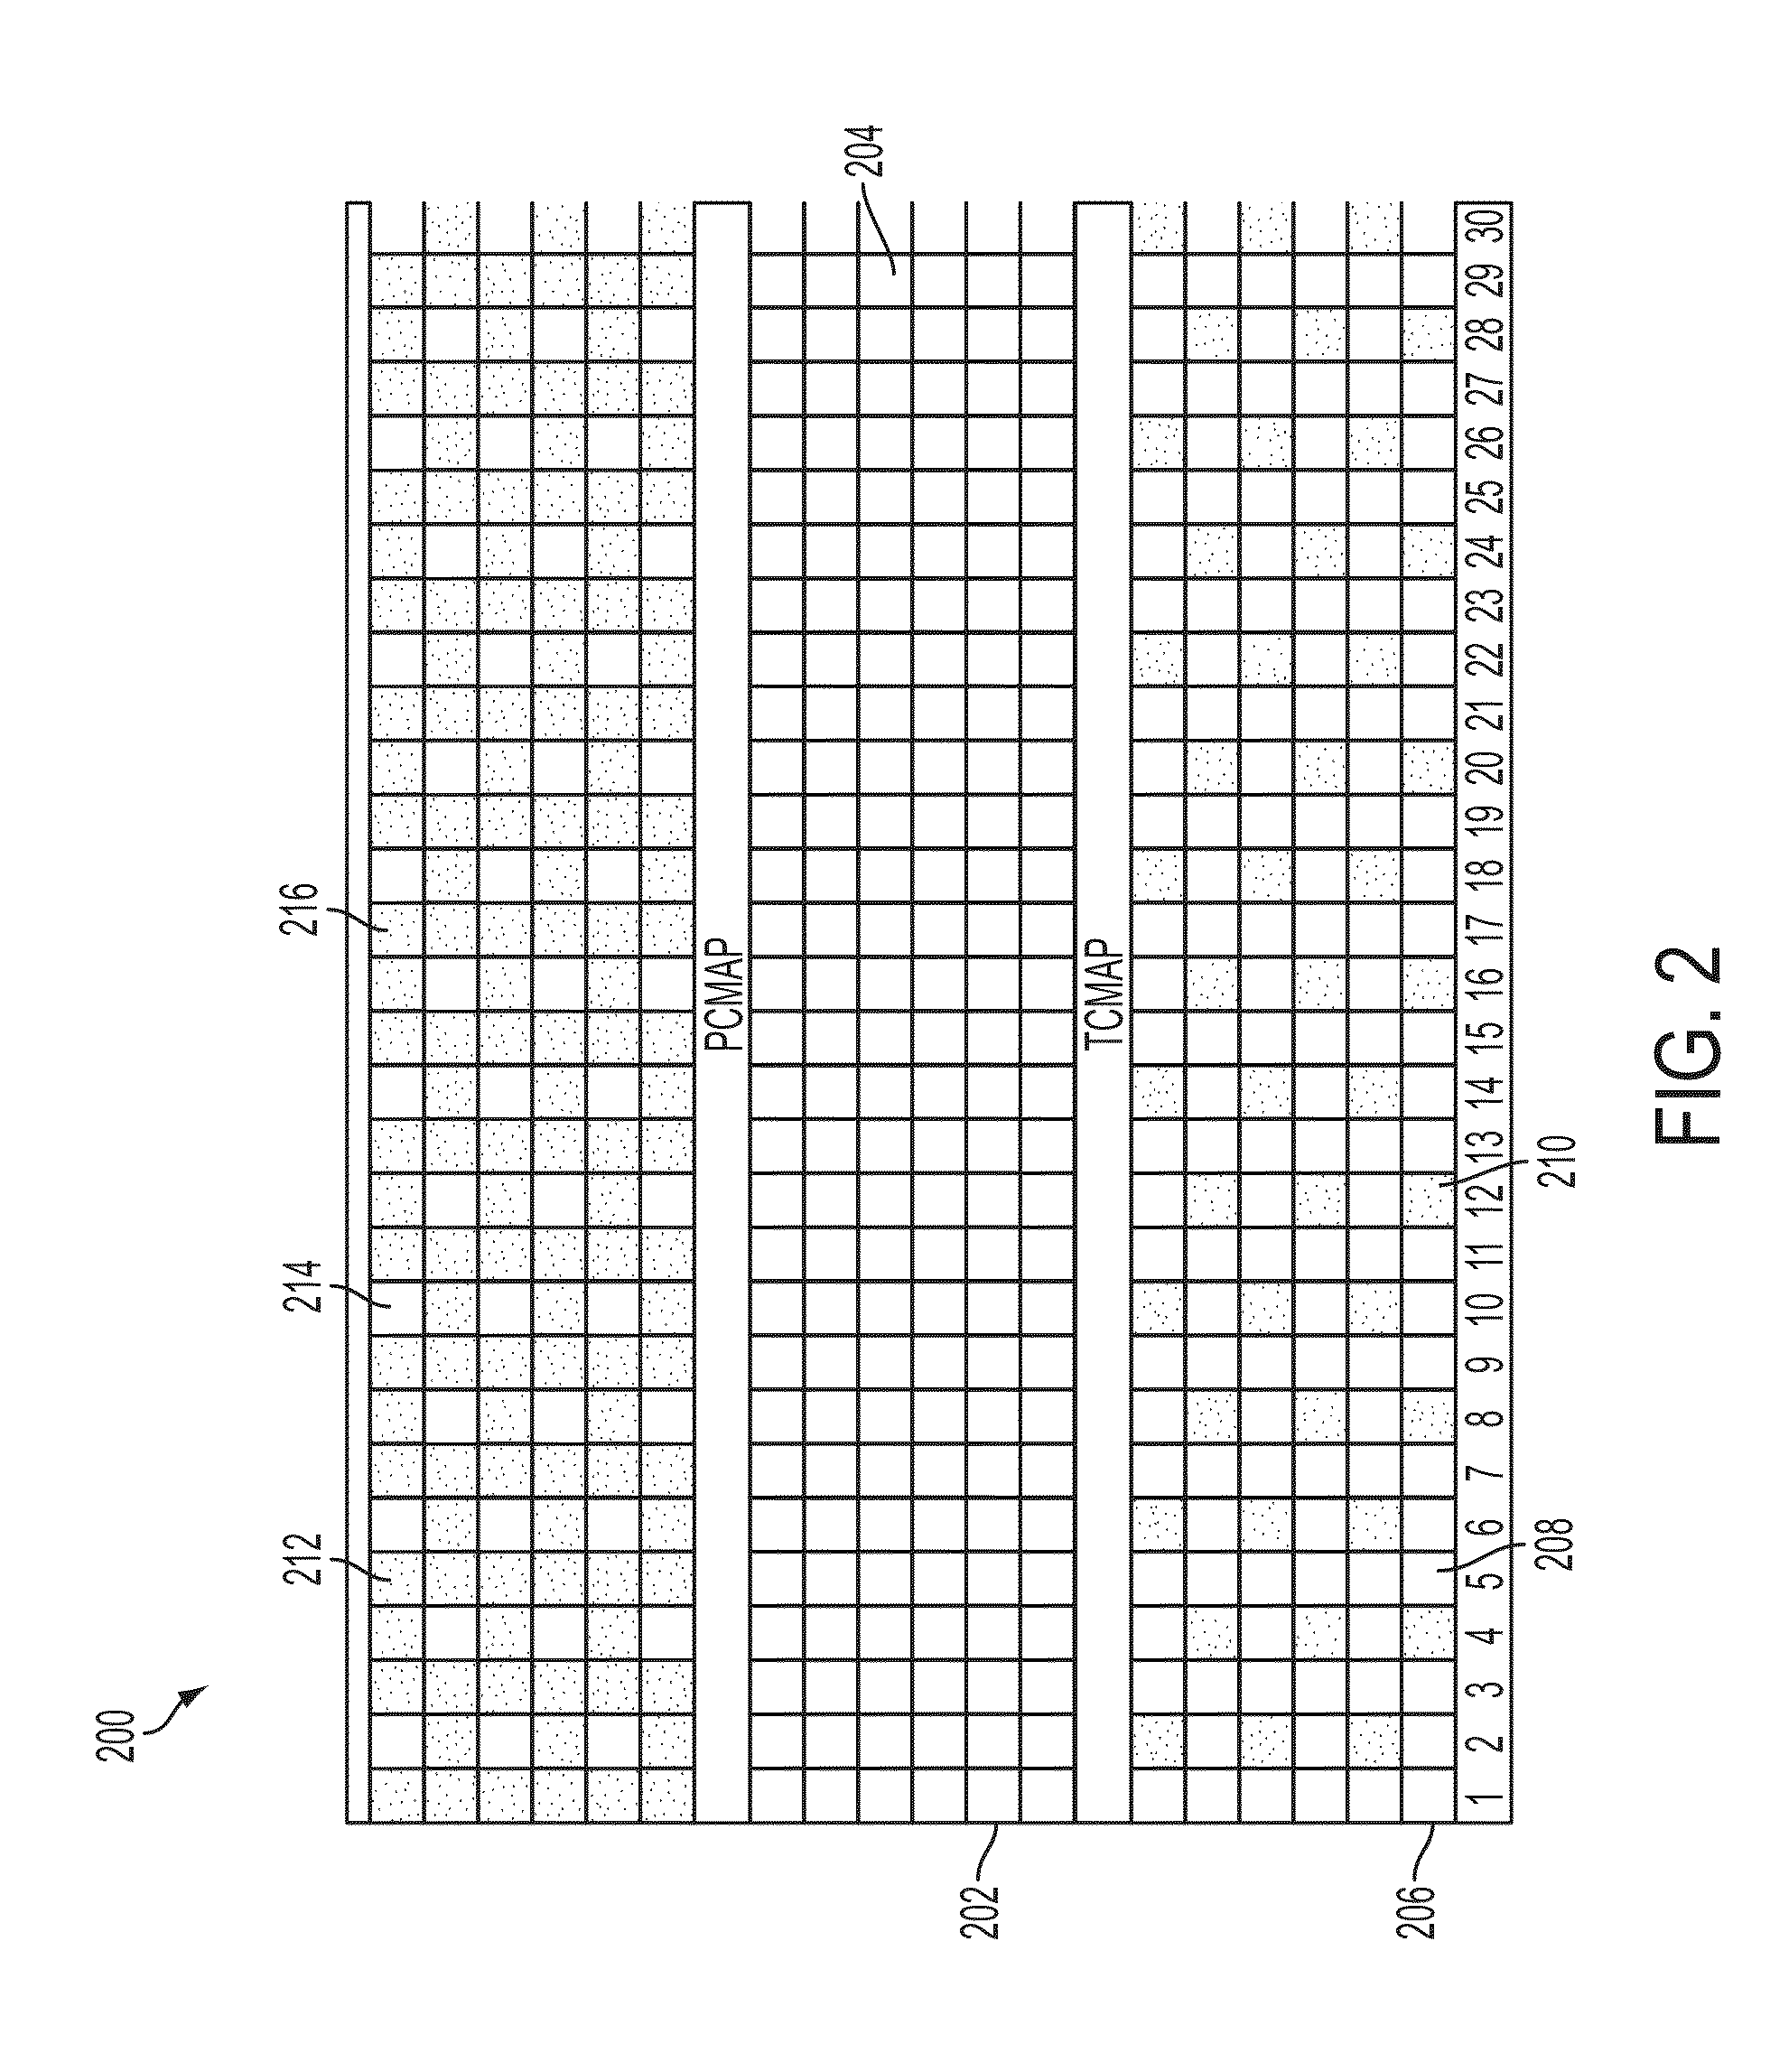 PET Scanner with Emission and Transmission Structures in a Checkerboard Configuration